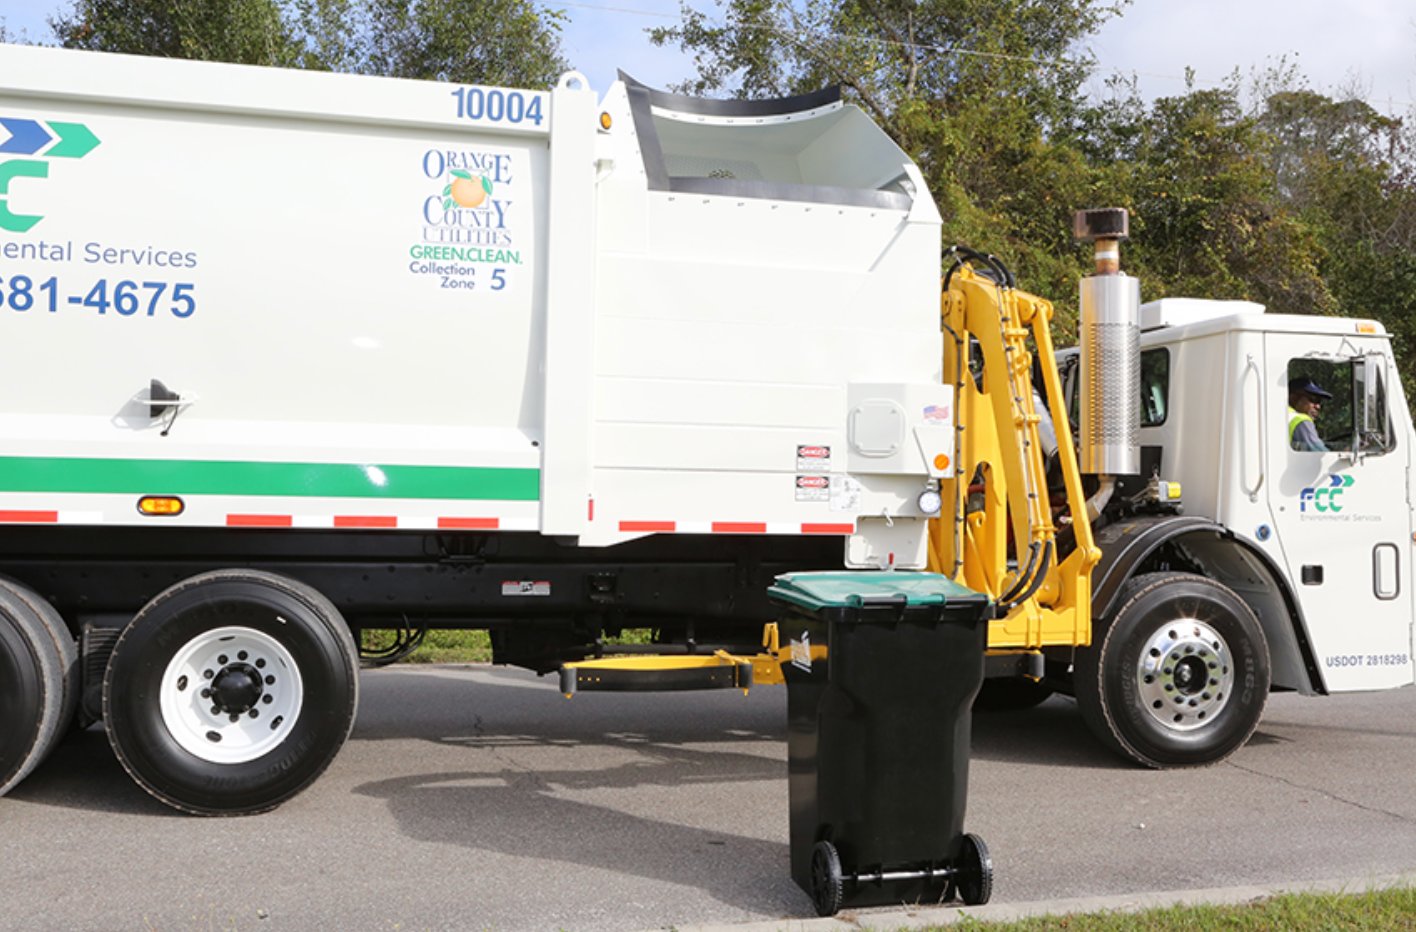 Orange County updates its trash collection schedule | The Apopka Voice